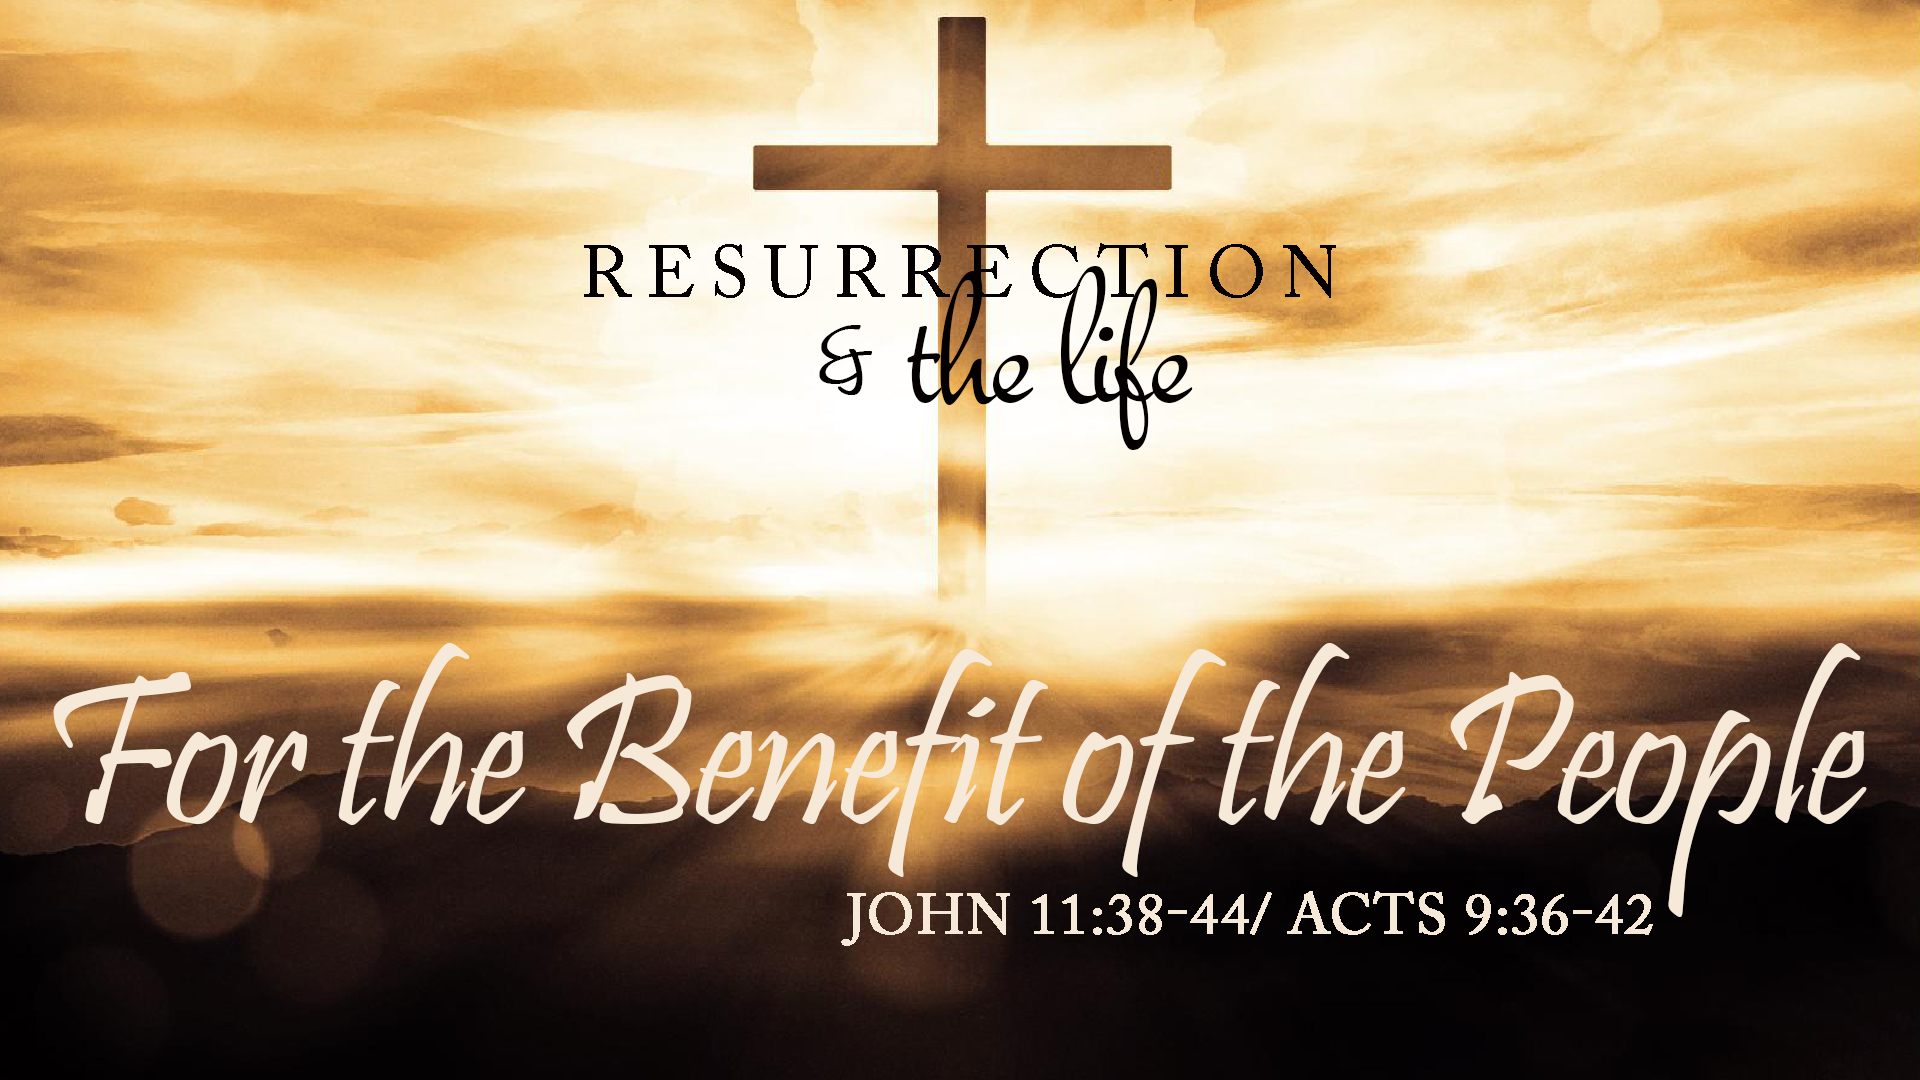  Resurrection & the Life, part 2: For the Benefit of People  Image